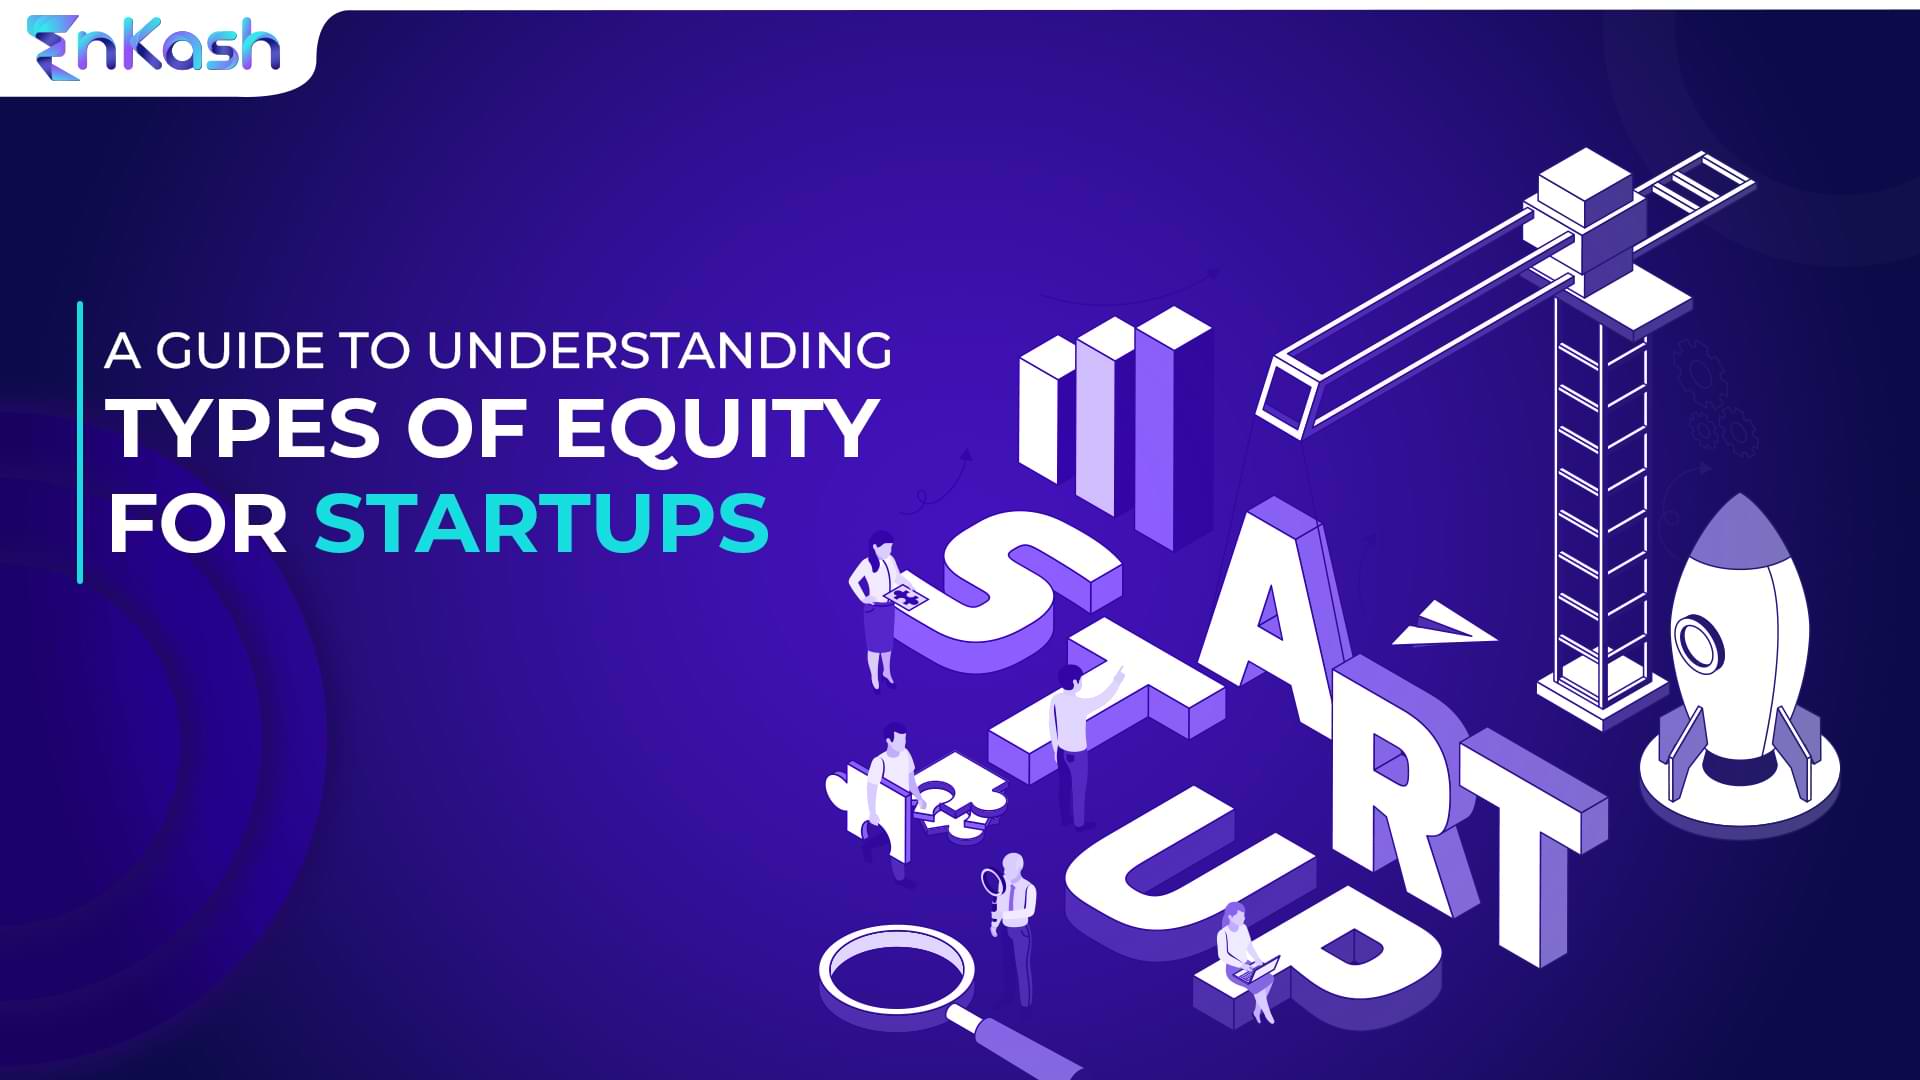 Types of equity for startups